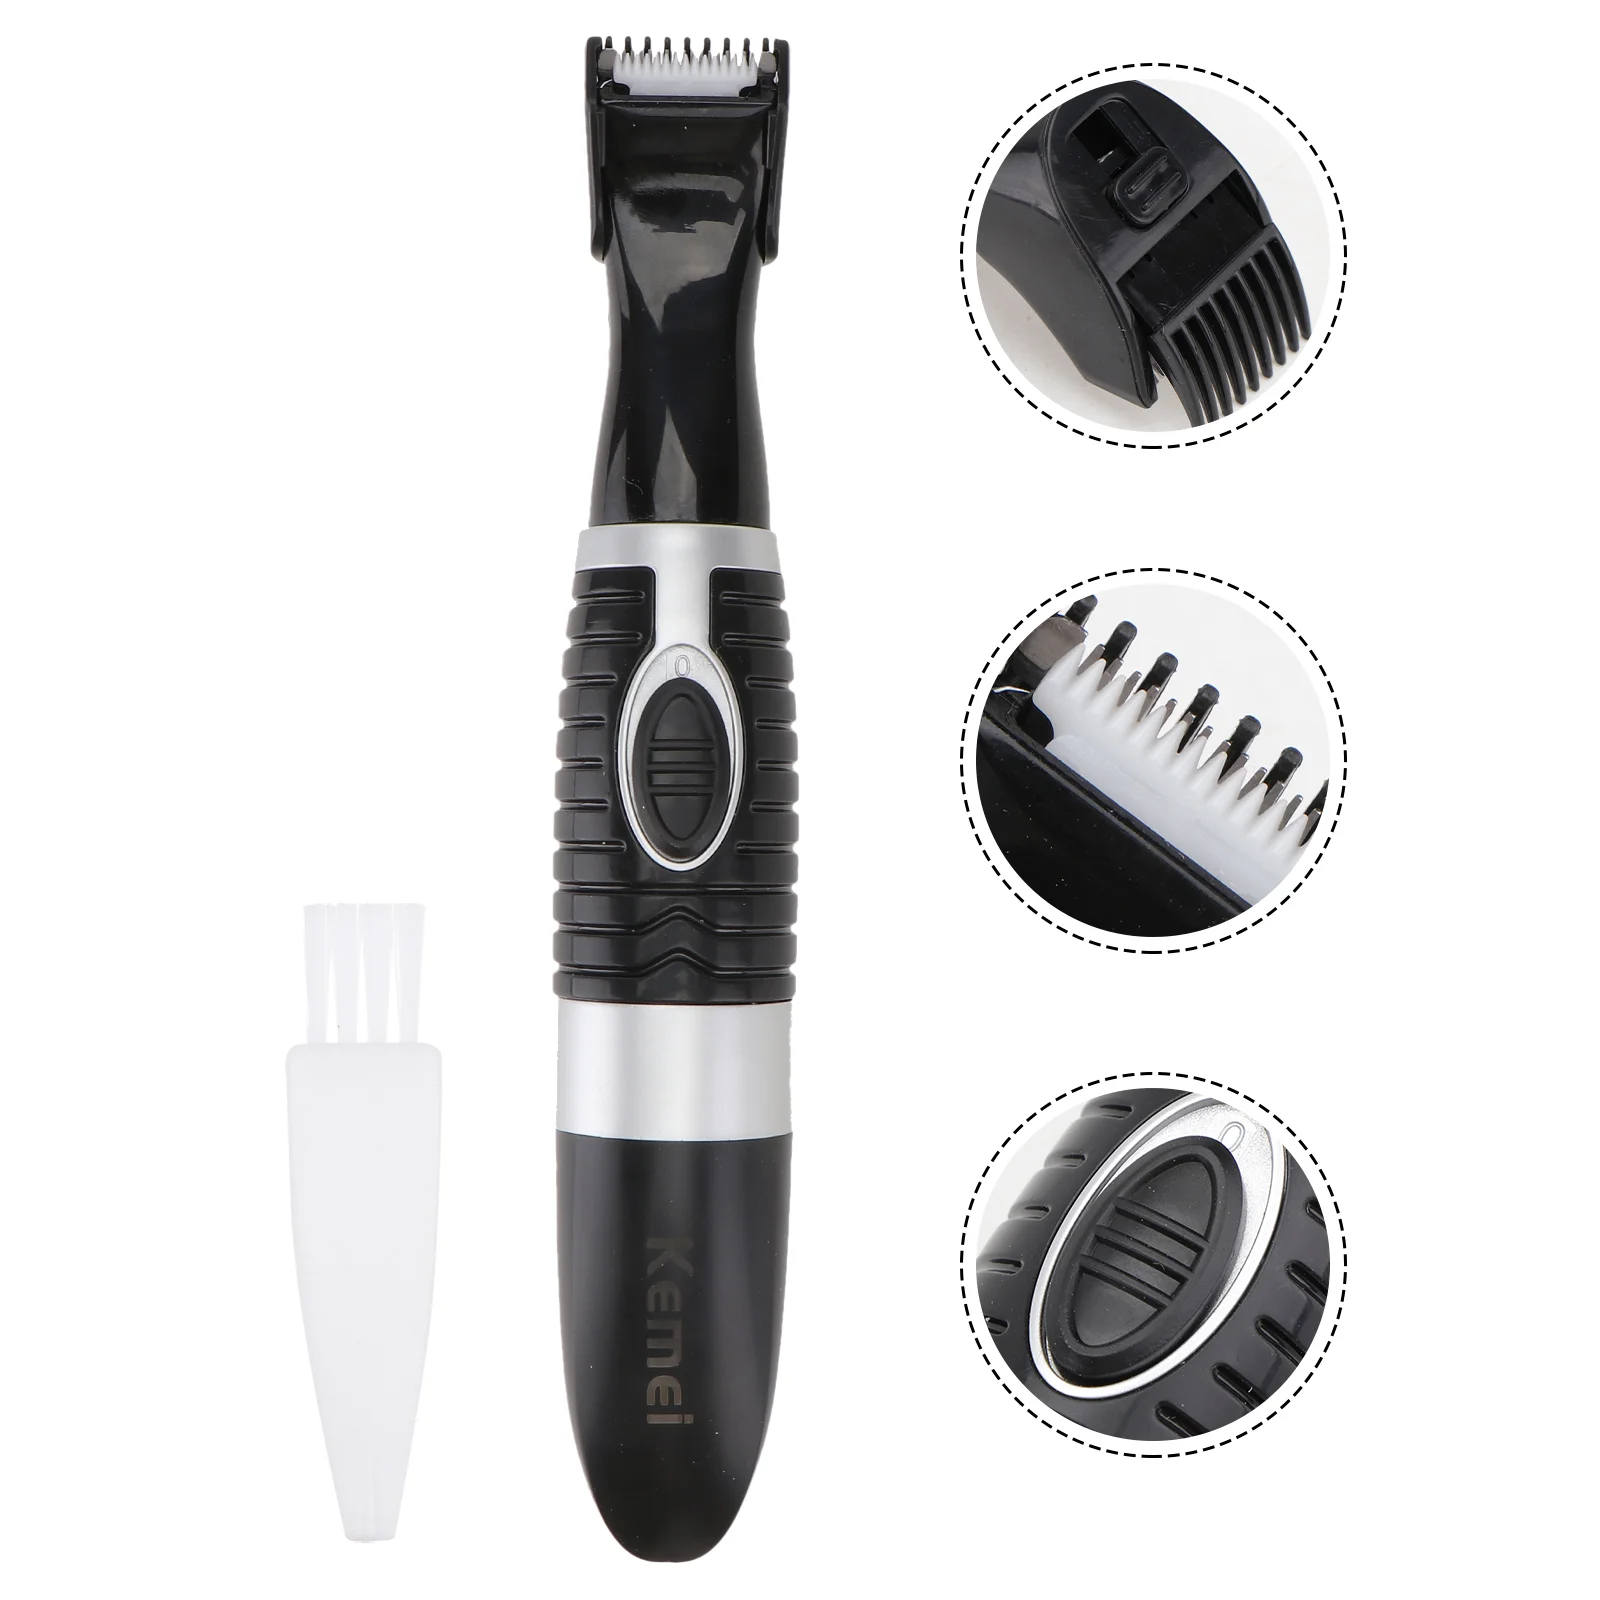 

Hair Dog Clippers Pet Clipper Grooming Shaver Trimmer Cordless Cat Kit Tool Body Tools Combs Guide Electric Cutting Human Kitten